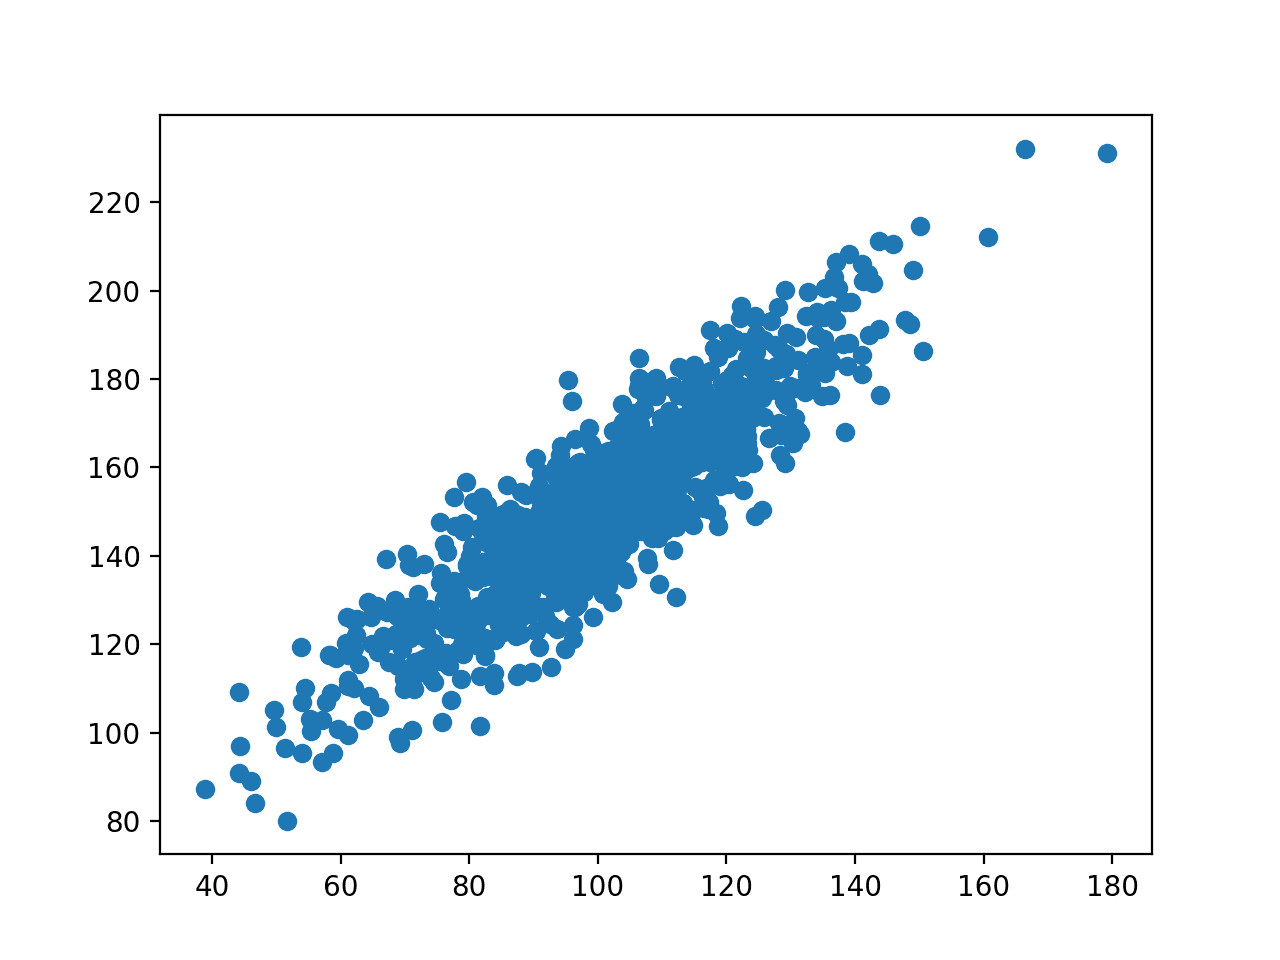 How to Calculate Correlation Between Variables in Python